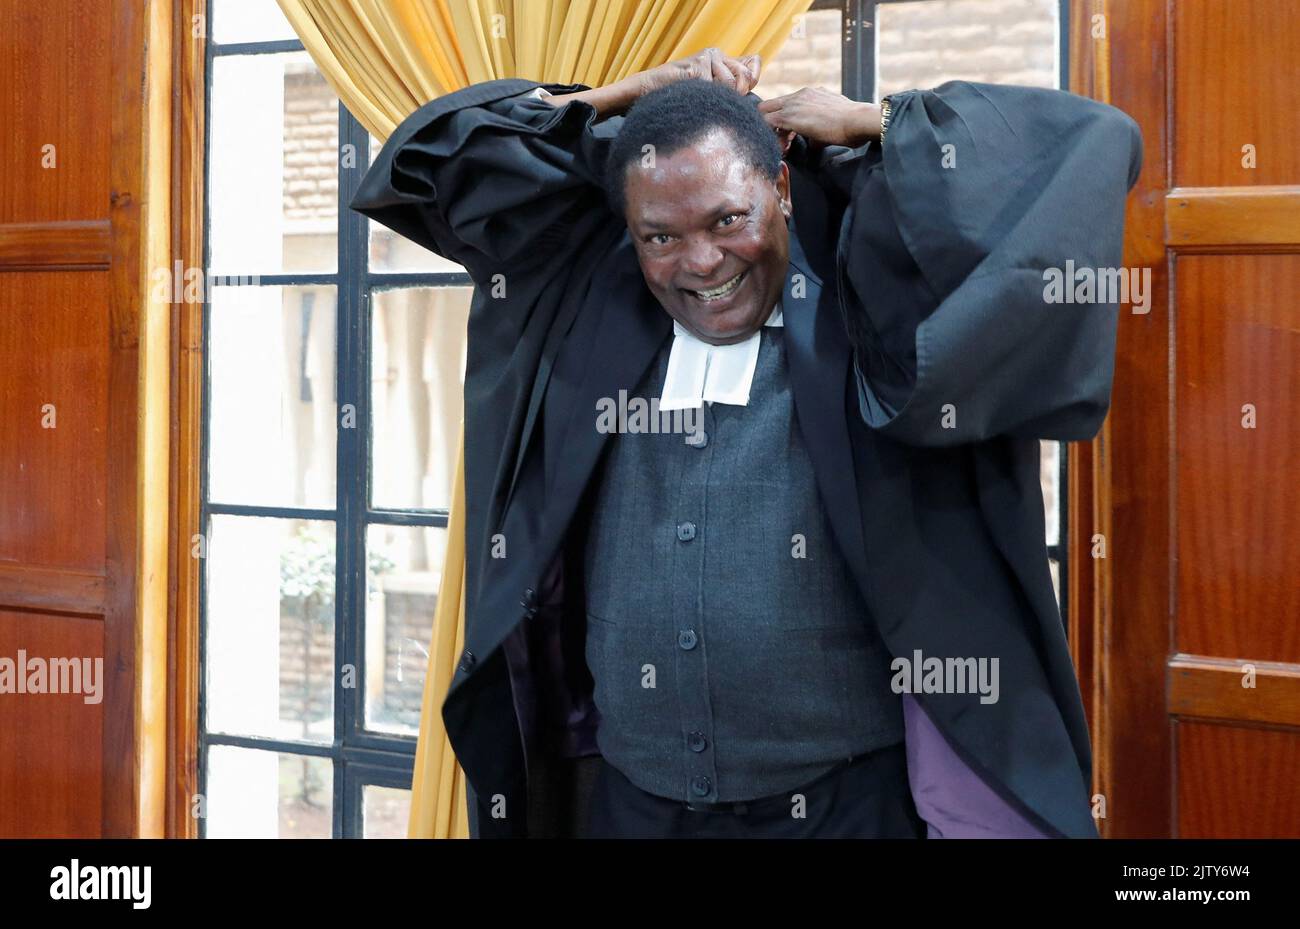 Senior Counsel Kioko Kilukumi, representing Kenya's President-elect William Ruto prepares to attend the final hearing day over a petition seeking to invalidate the outcome of the recent presidential election, at the Supreme Court in Nairobi, Kenya September 2, 2022. REUTERS/Thomas Mukoya Stock Photo